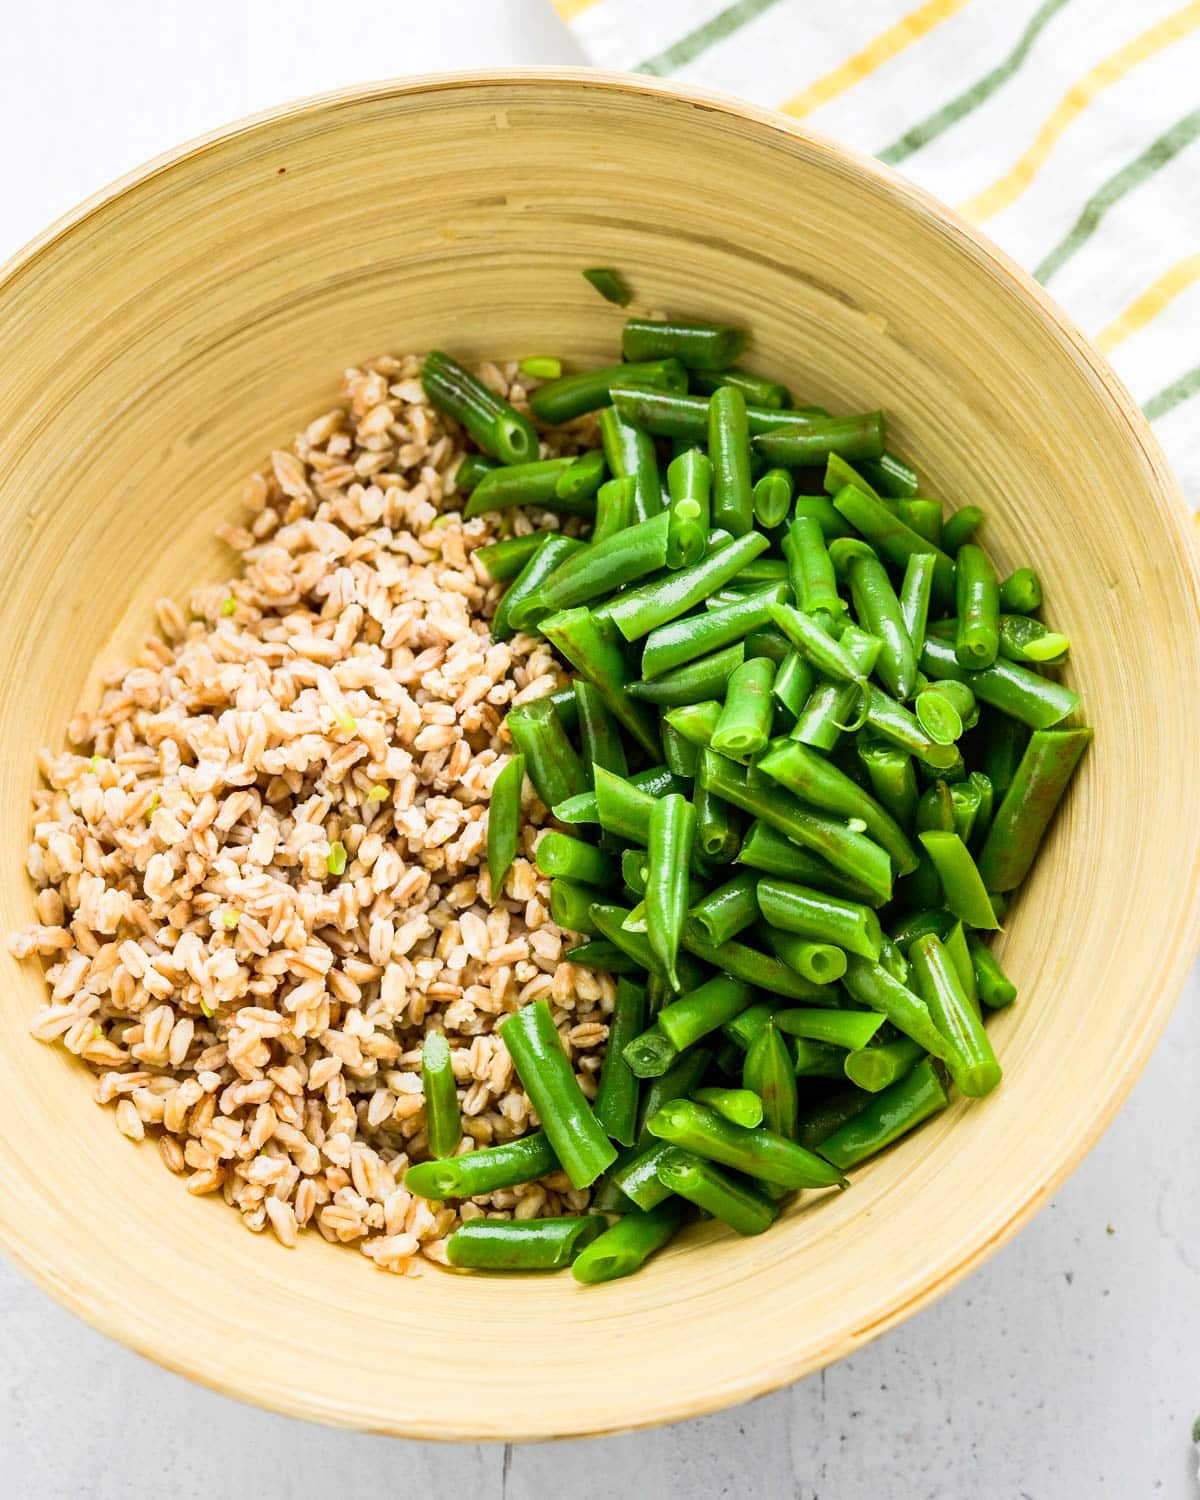 combining the cooked farro and green beans in a salad bowl.